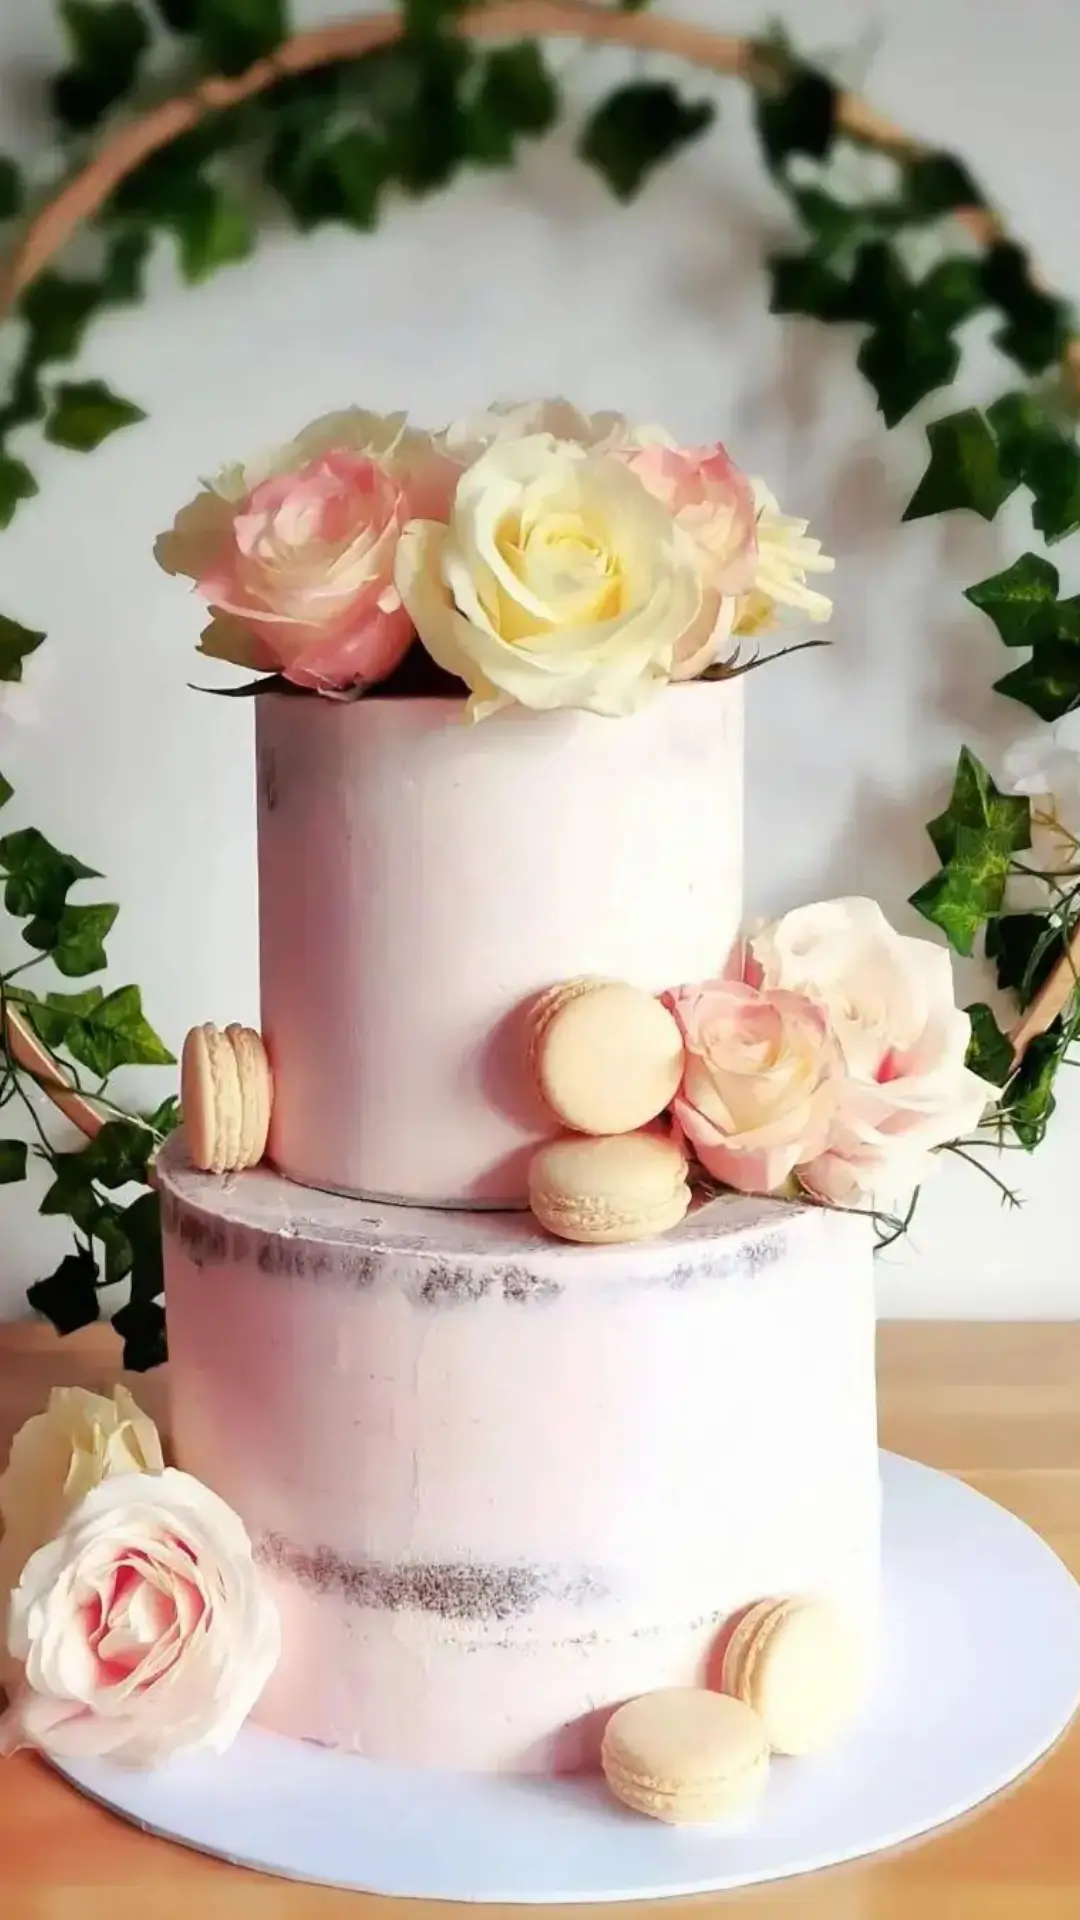 The Little House Of Baking | Wedding Cakes London